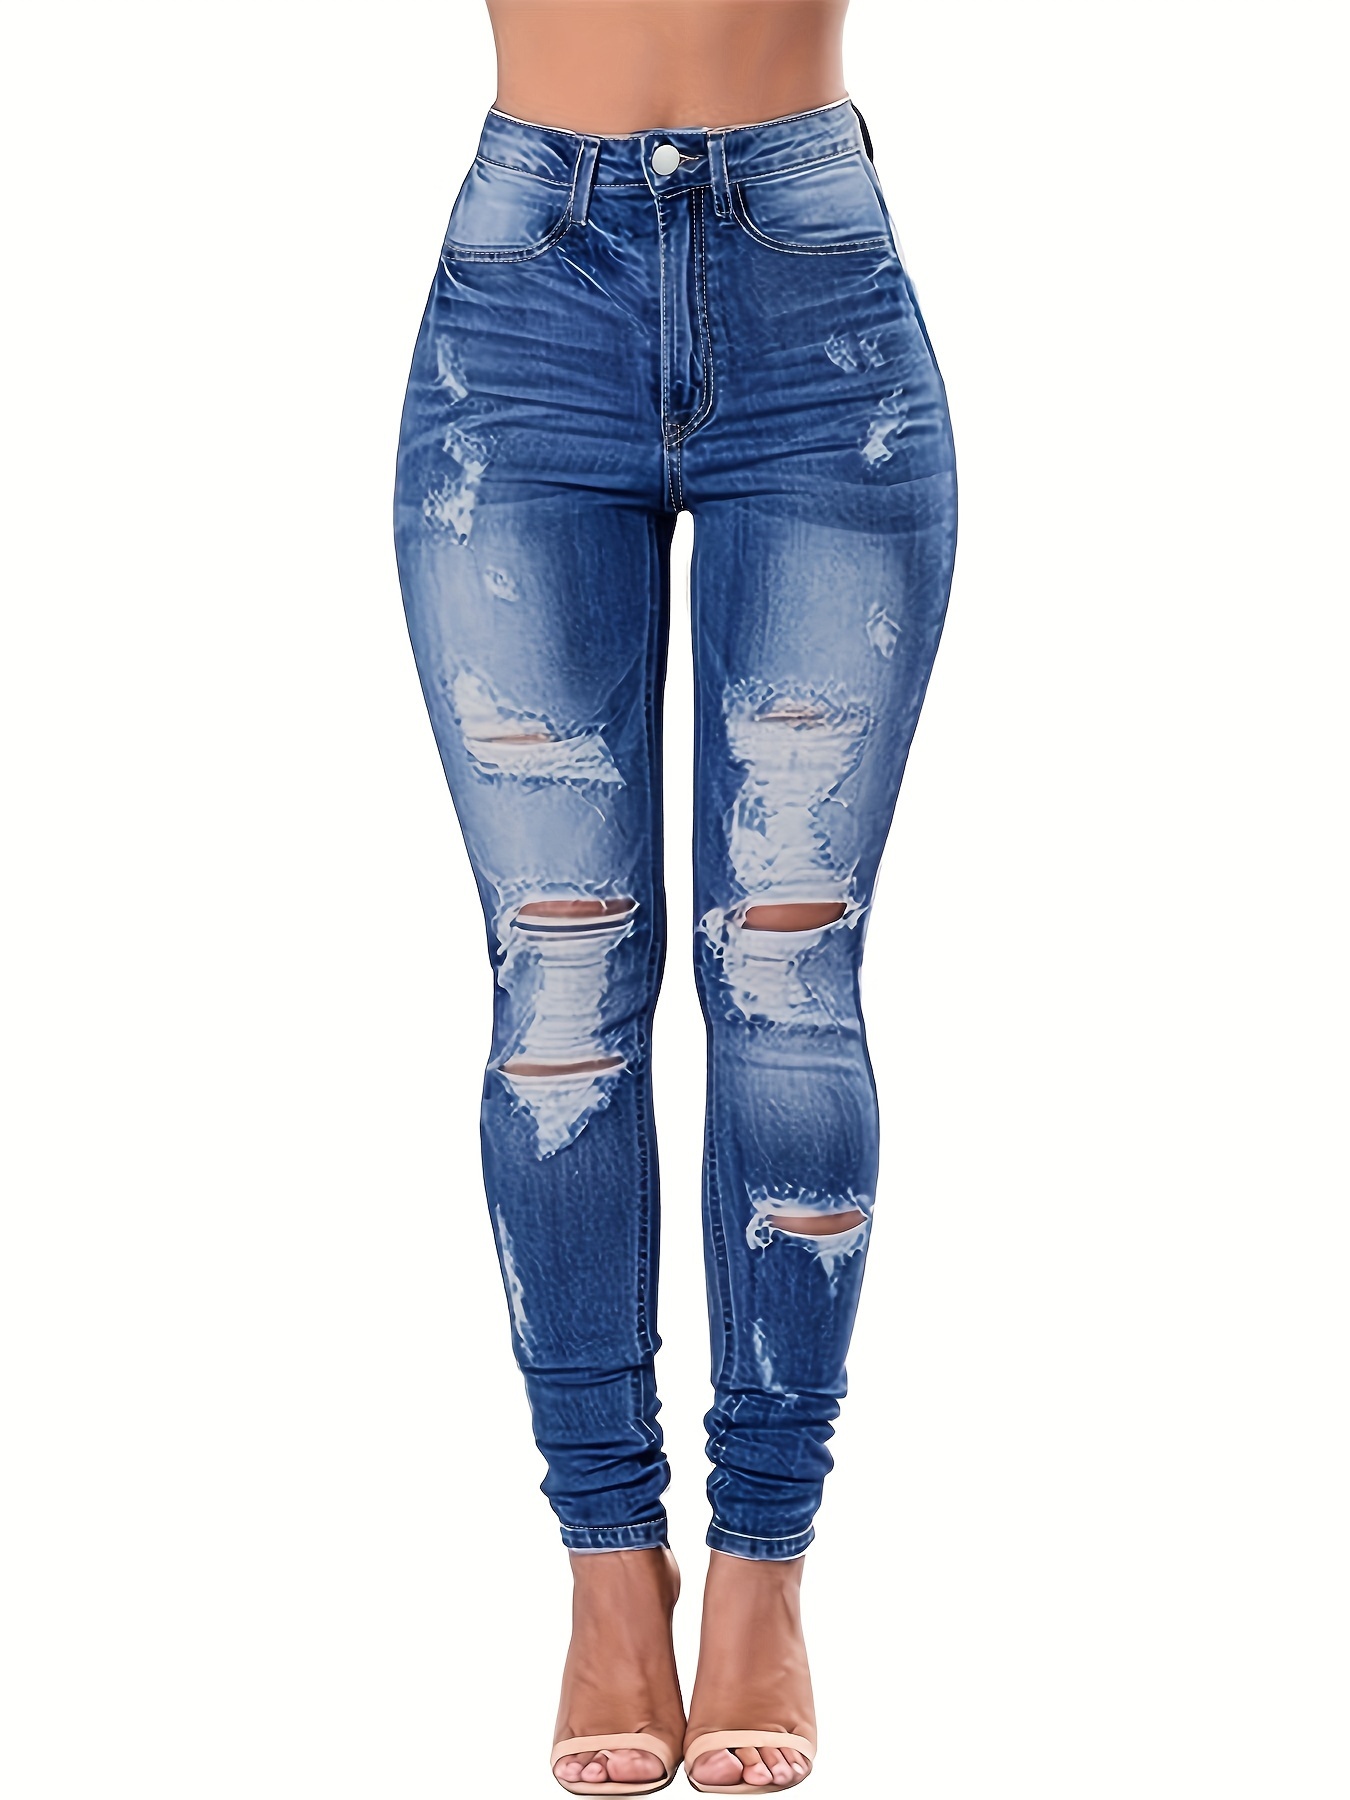 Blue Ripped Holes Skinny Jeans, Slim Fit Slant Pockets Distressed Tight  Jeans, Women's Denim Jeans & Clothing